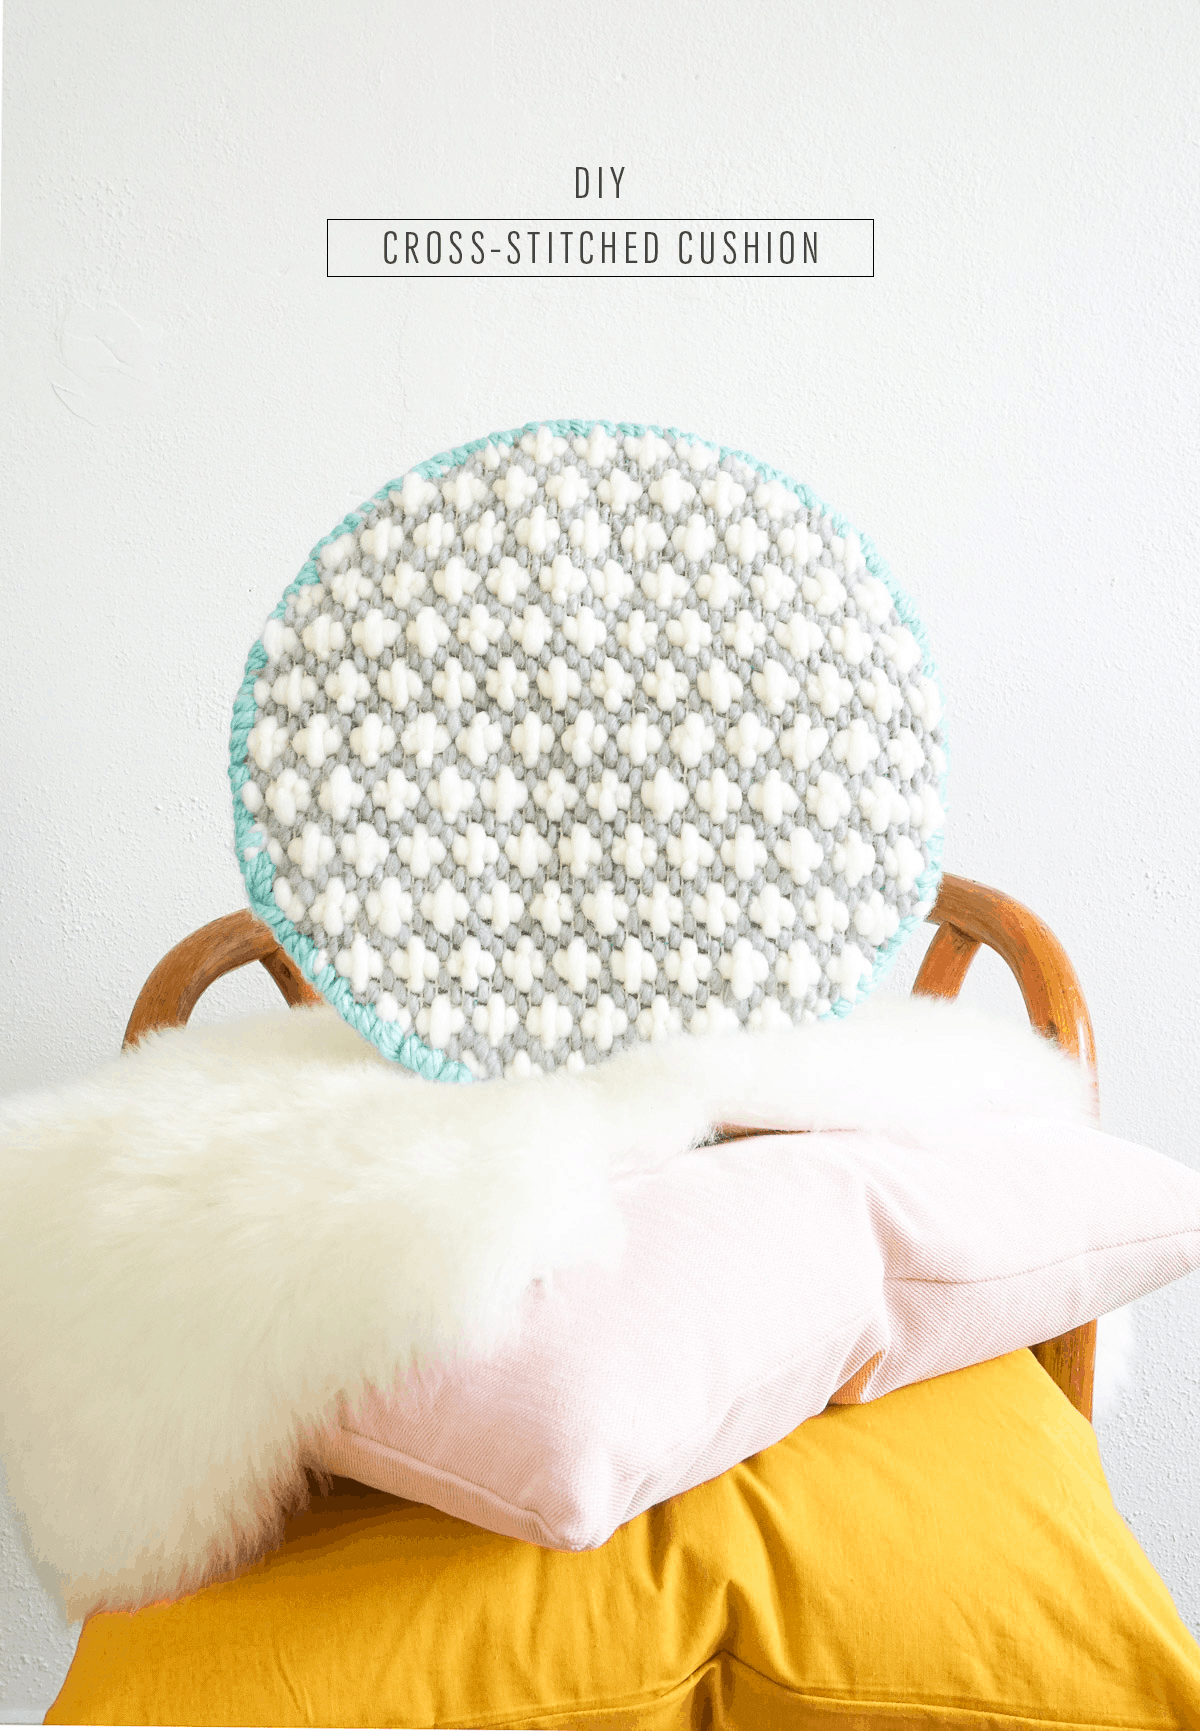 A modern DIY cross-stitched cushion to add texture to your home decor space! - sugar and cloth